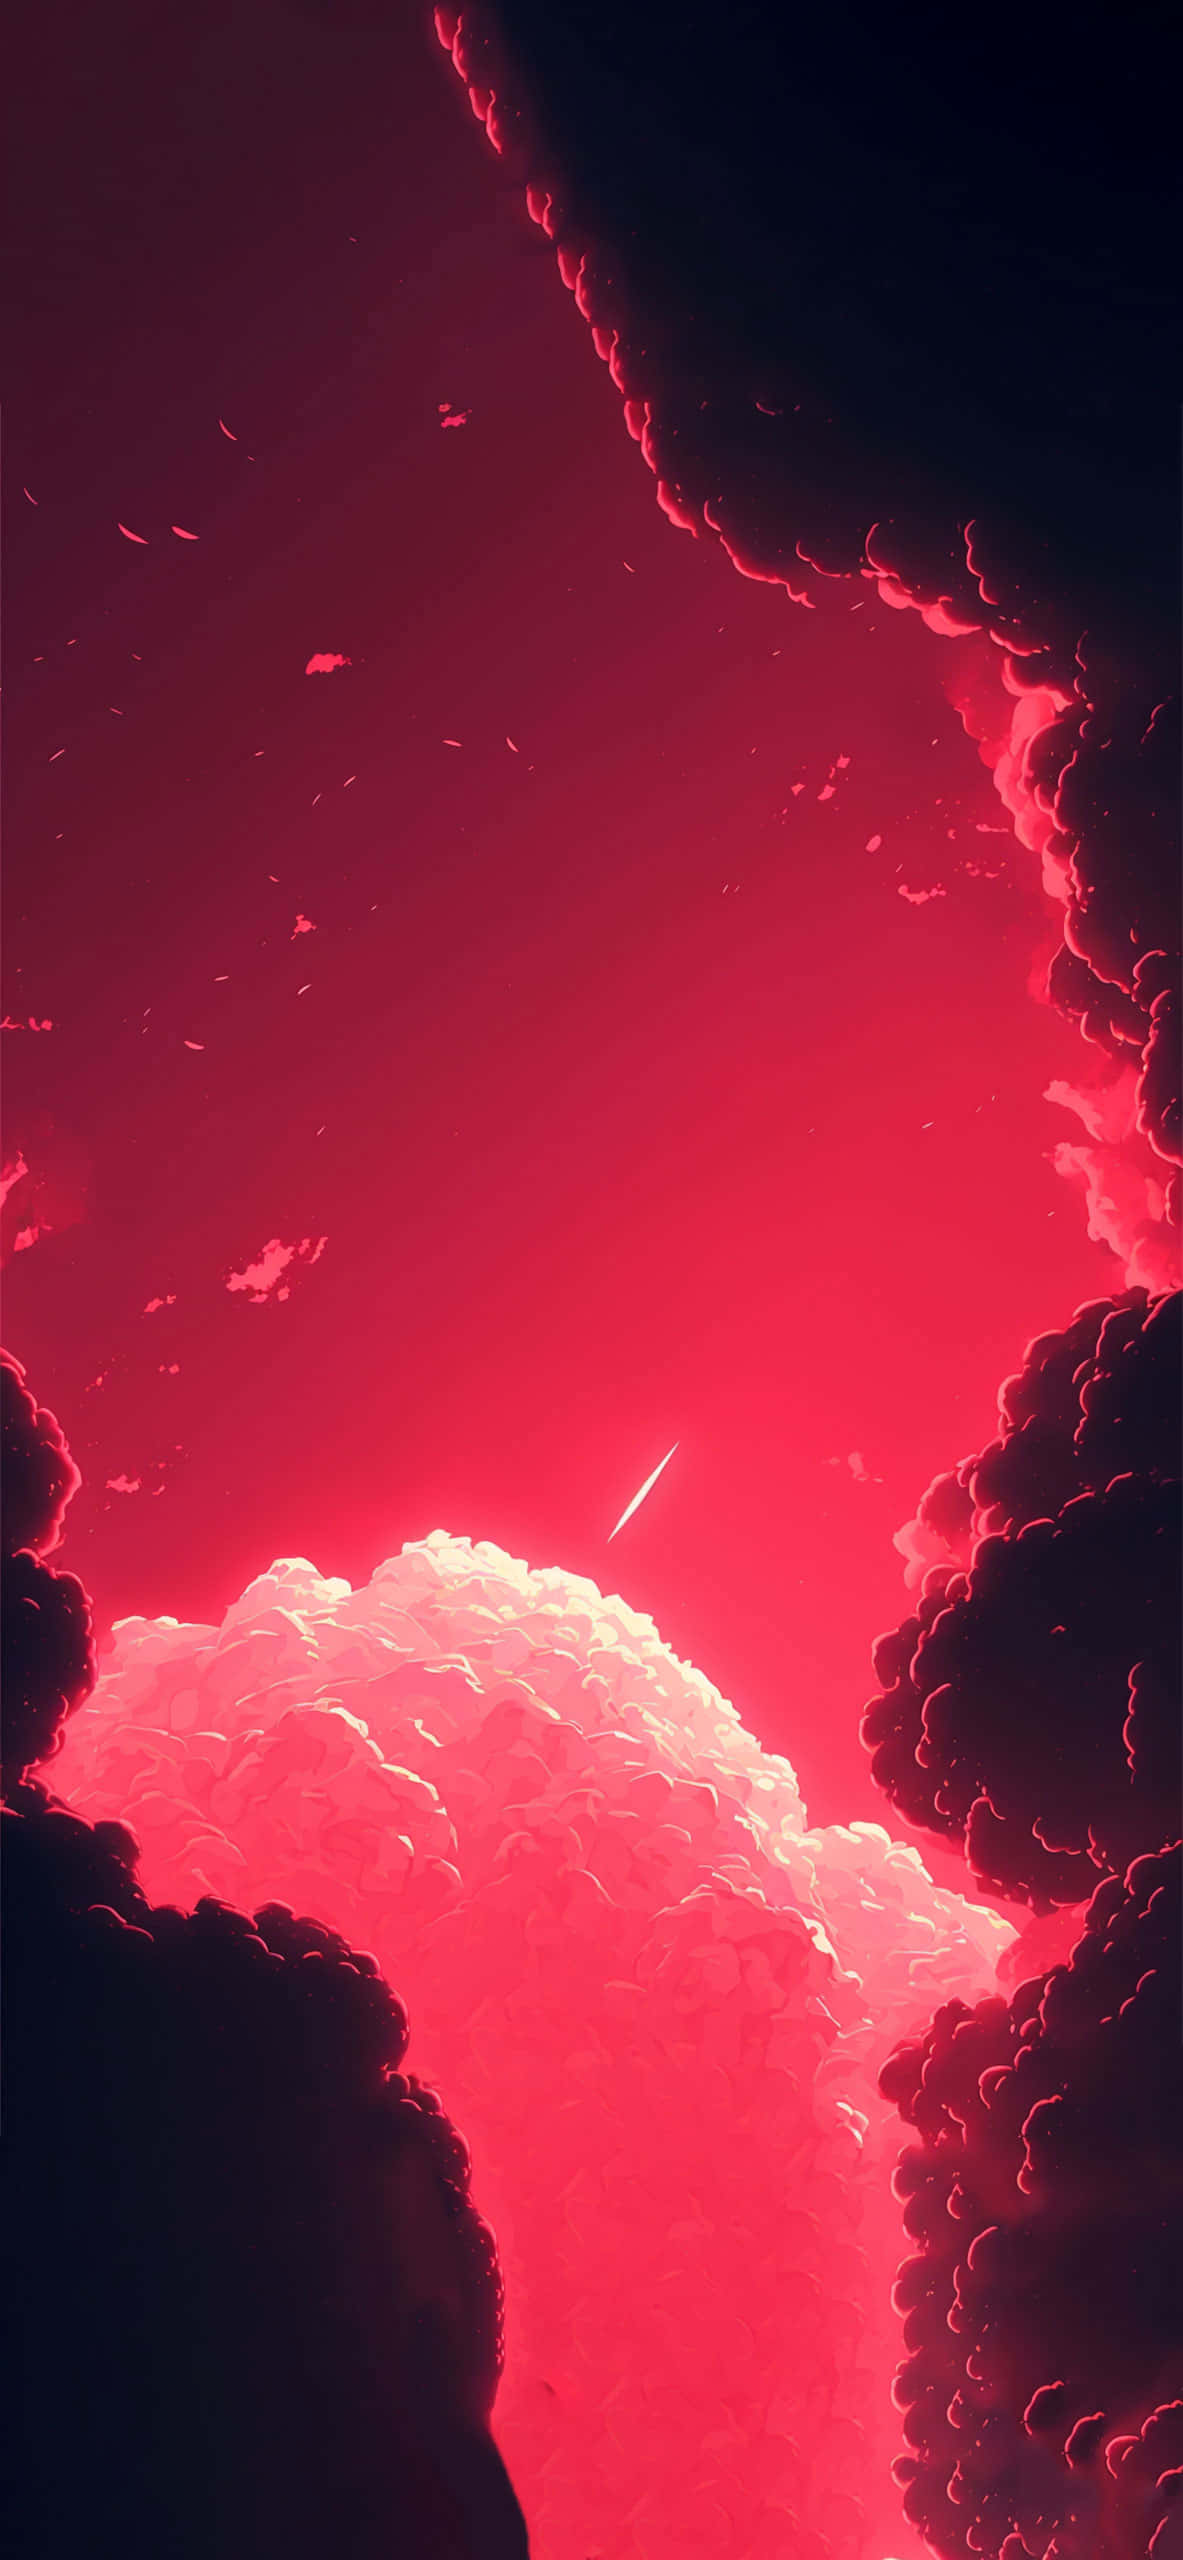 Download A Red Sky With Clouds And A Red Sun | Wallpapers.com